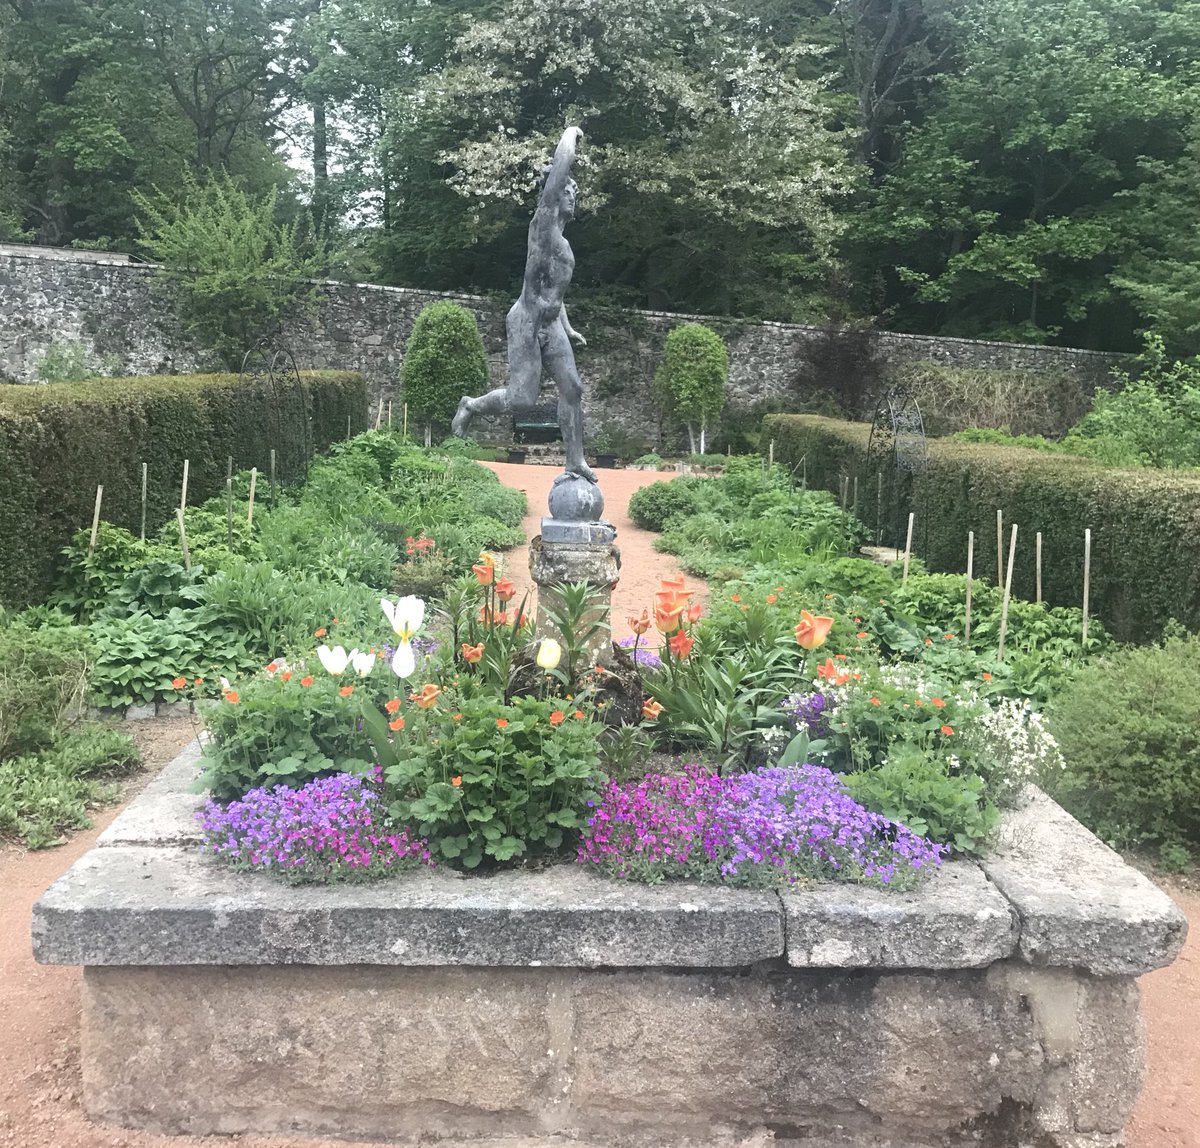 Our mercury statue is always surrounded by colourful flowers in the walled garden. He takes pride of place right in the middle of it all. Surveying the trees, flowers, birds and bees. #candacraig #walledgarden #Scotland #nature #visitABDN #Cairngorms #historicalscotland